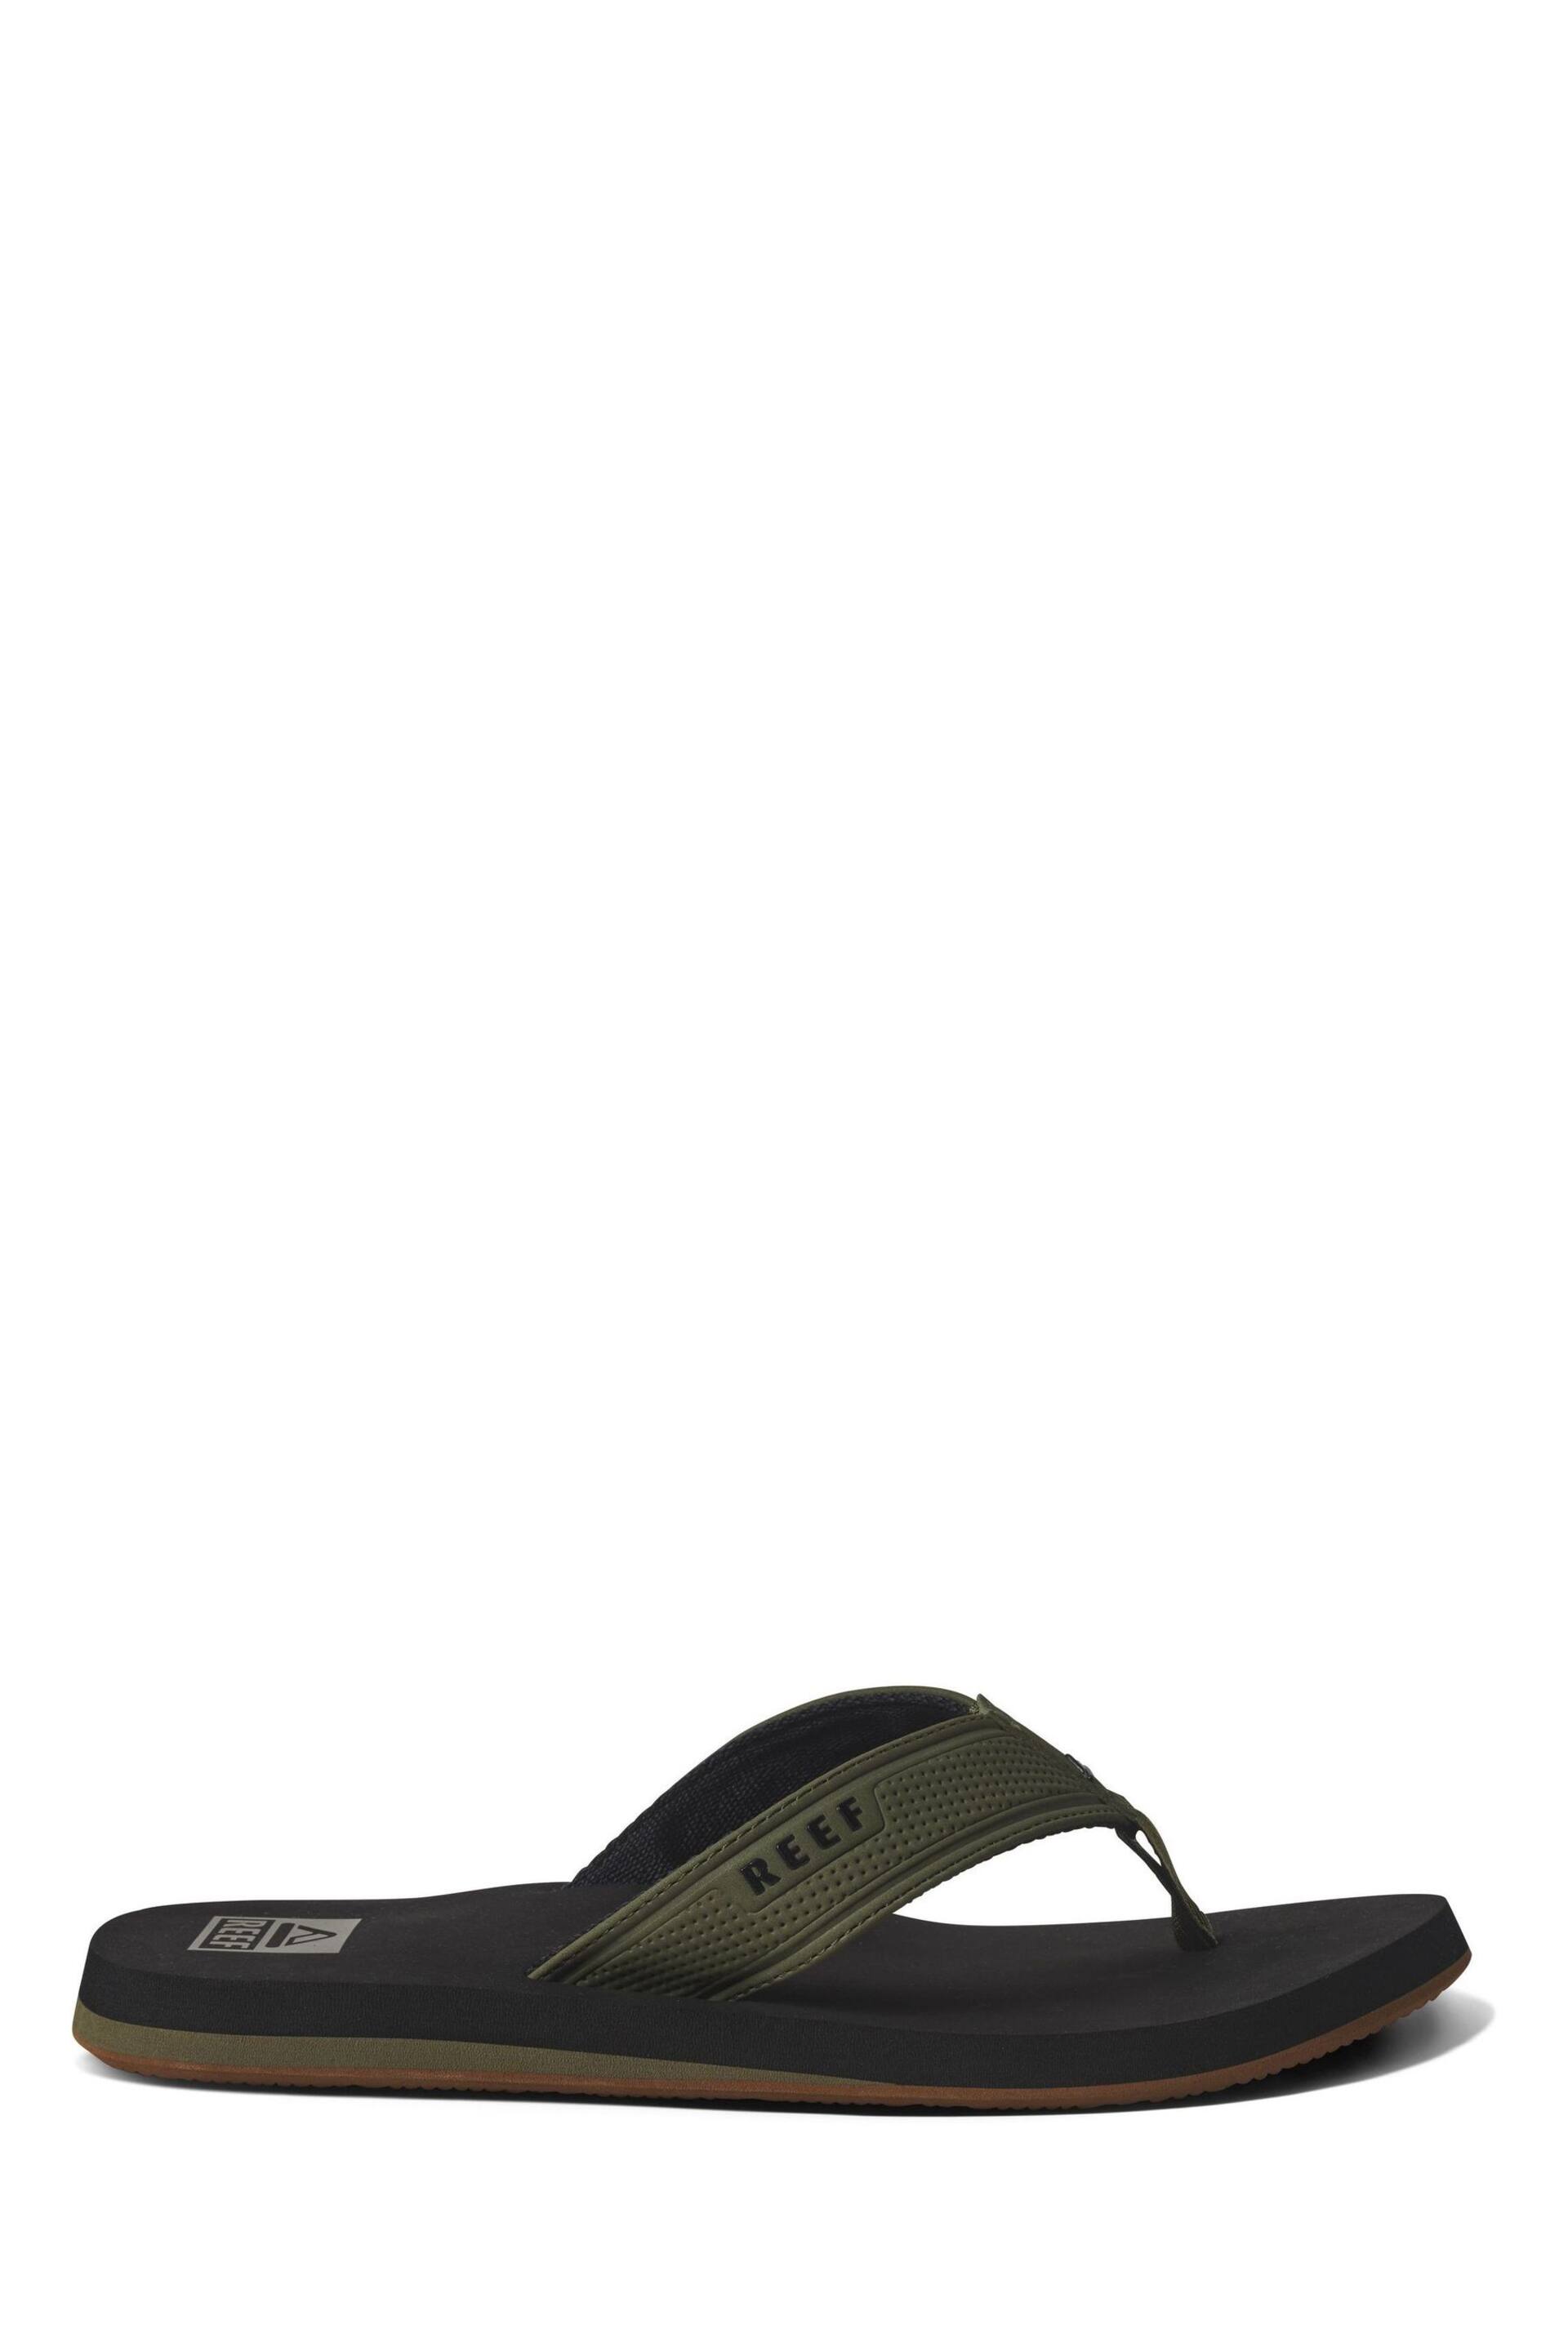 Reef The Layback Black Sandals - Image 1 of 6